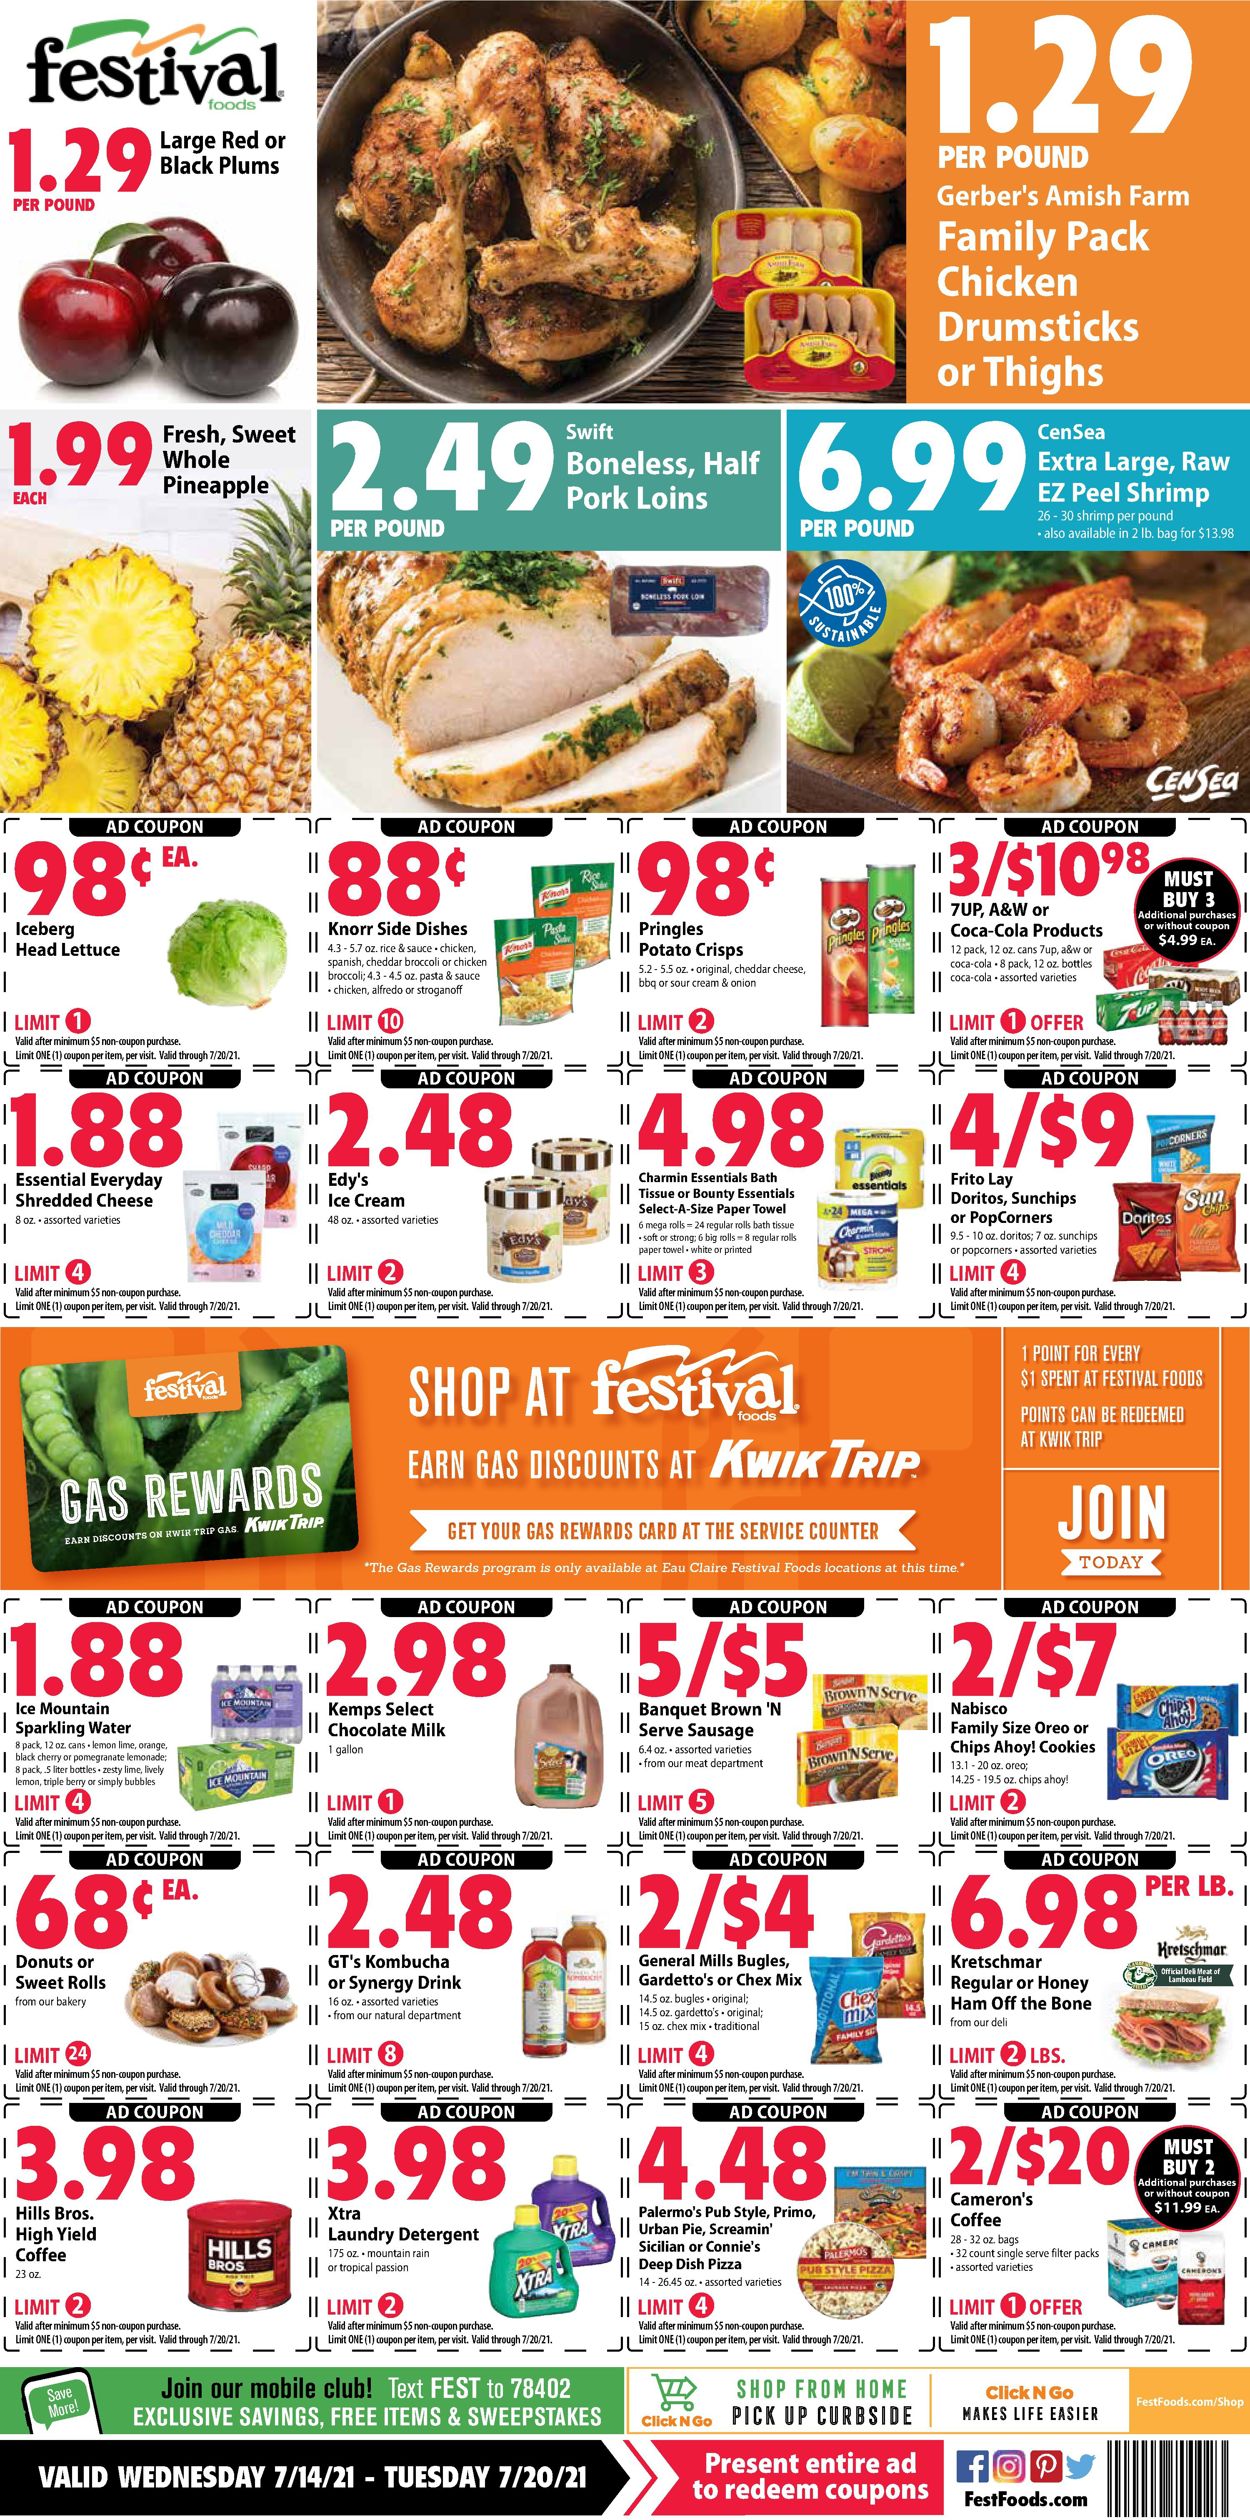 Festival Foods Current weekly ad 07/14 - 07/20/2021 - frequent-ads.com